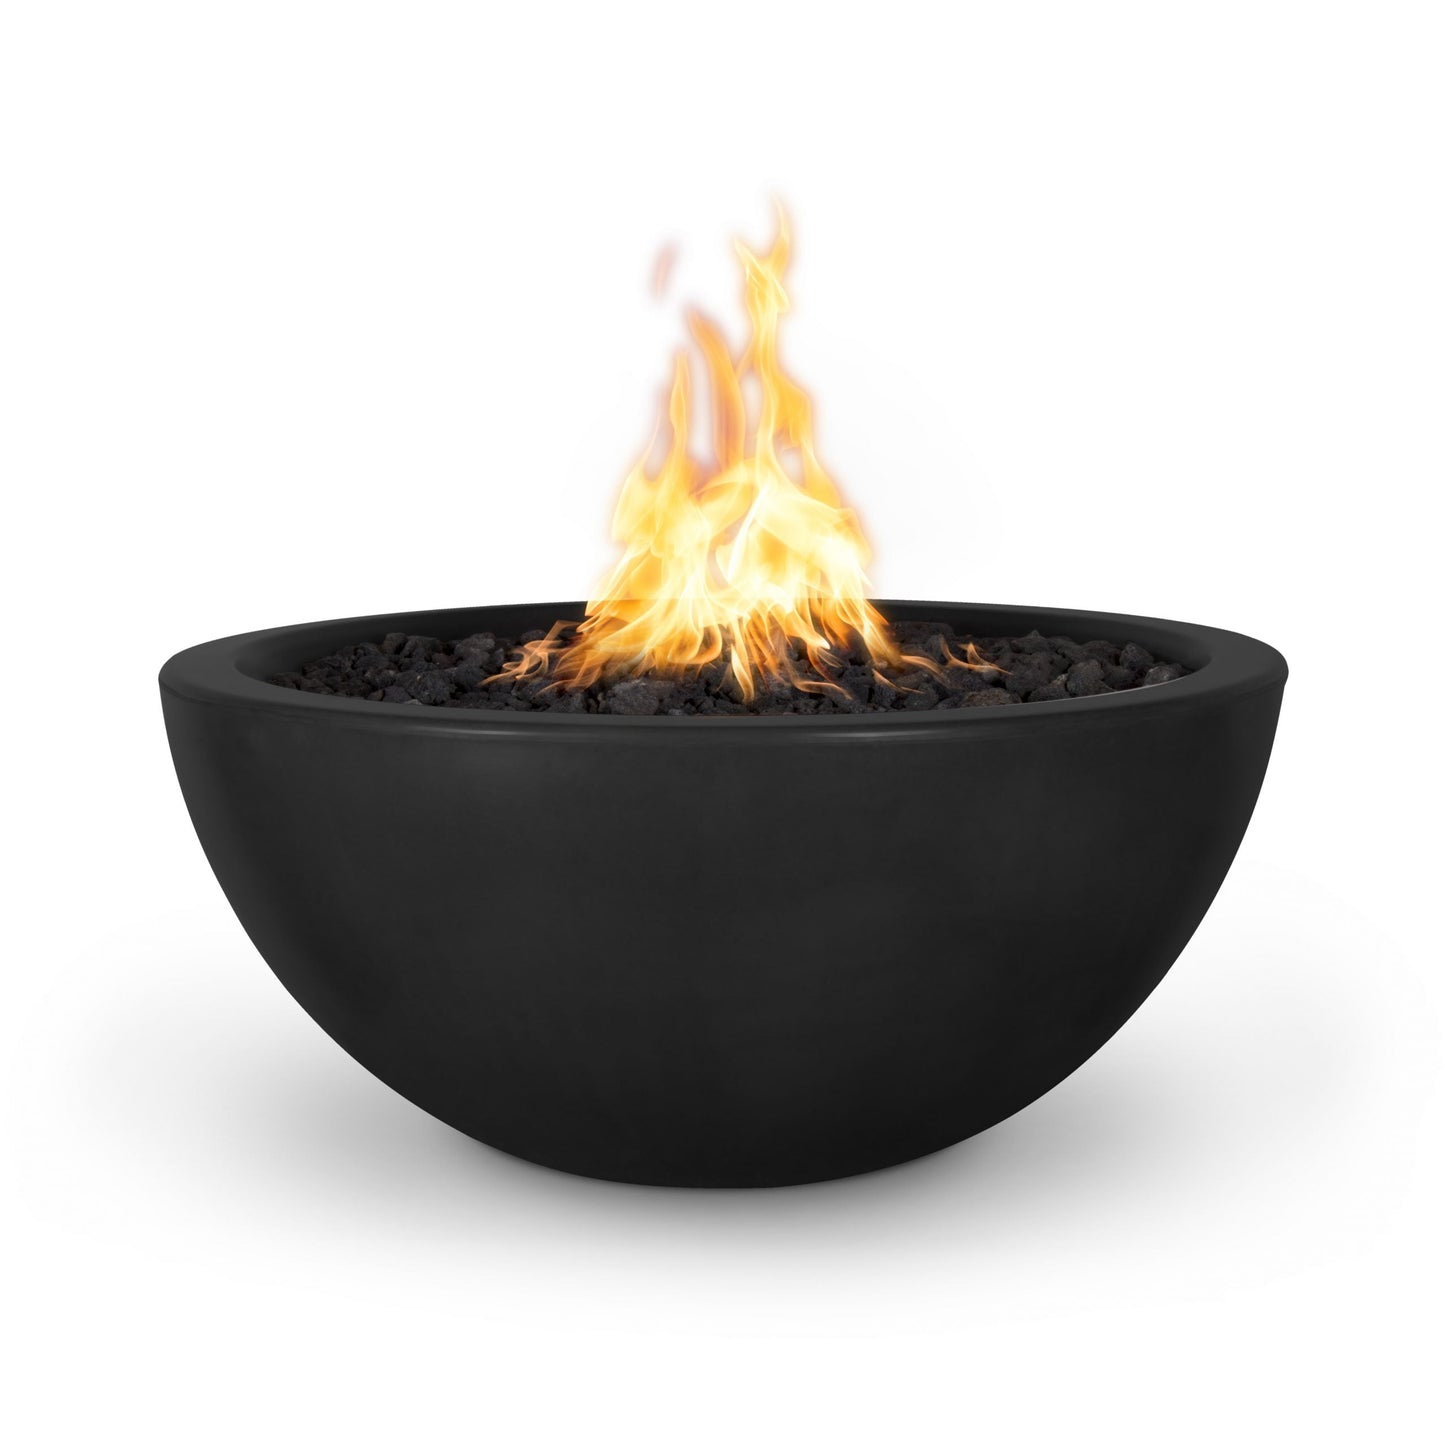 The Outdoor Plus Round Luna 30" Rustic Moss Stone GFRC Concrete Liquid Propane Fire Bowl with Match Lit with Flame Sense Ignition